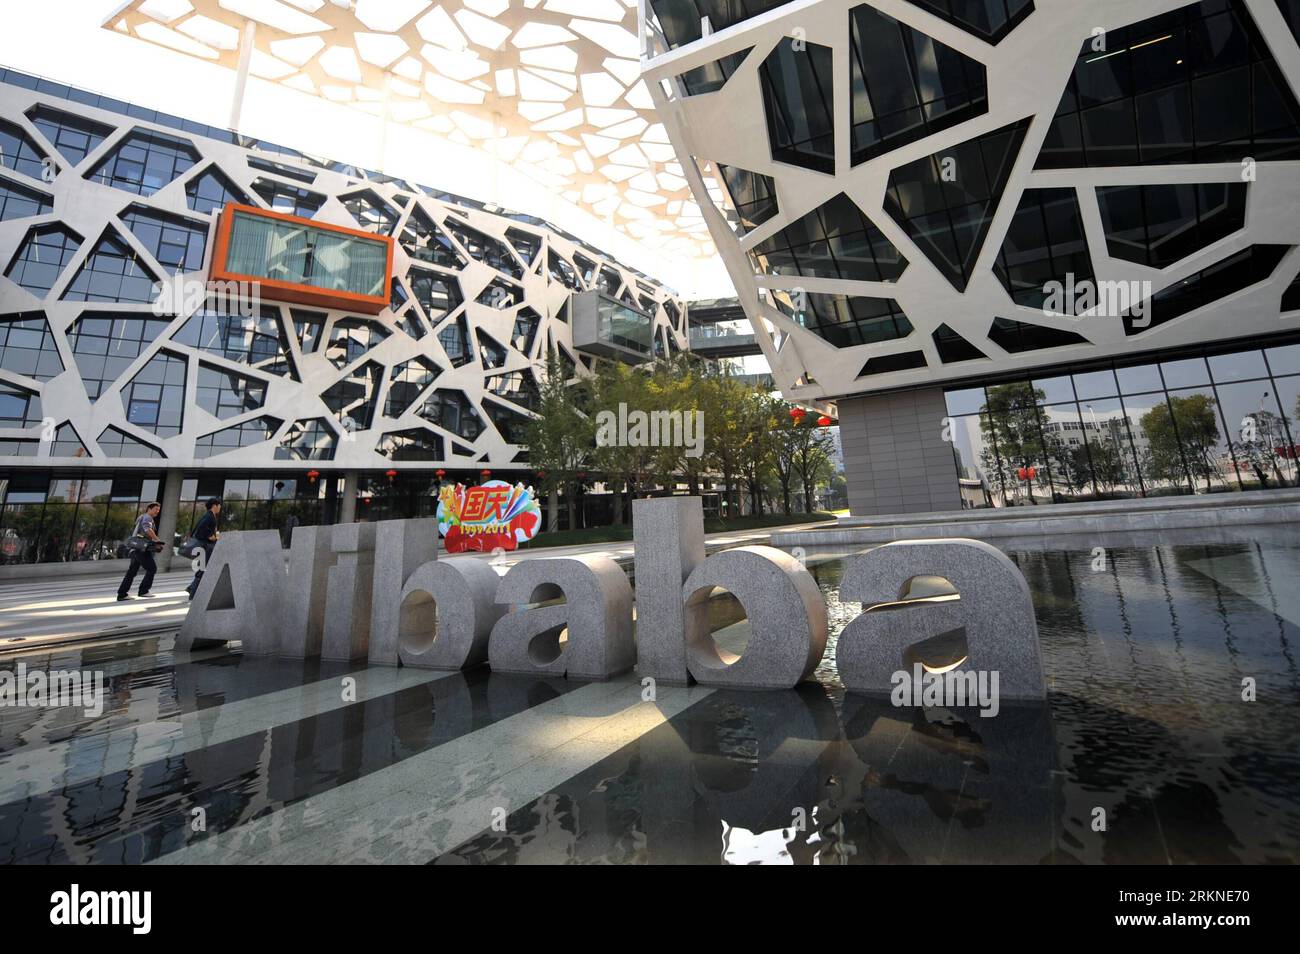 Bildnummer: 57100564  Datum: 17.10.2011  Copyright: imago/Xinhua (120223) -- HANGZHOU, Feb. 23,  (Xinhua) -- File photo taken on Oct. 17, 2011 shows the headquarters of Alibaba Group in Hangzhou, capital of east China s Zhejiang Province. Chinese e-commerce giant Alibaba Group has offered to privatize its Hong Kong-listed arm Alibaba.com, Ltd. at a price of 13.5 Hong Kong dollars per share, the companies said in a joint statement released Tuesday night. (Xinhua/Huang Zongzhi) (lfj) CHINA-ALIBABA GROUP-PRIVATIZATION PLAN (CN) PUBLICATIONxNOTxINxCHN Wirtschaft xns x2x  quer o0 Objekte Logo Gebäu Stock Photo